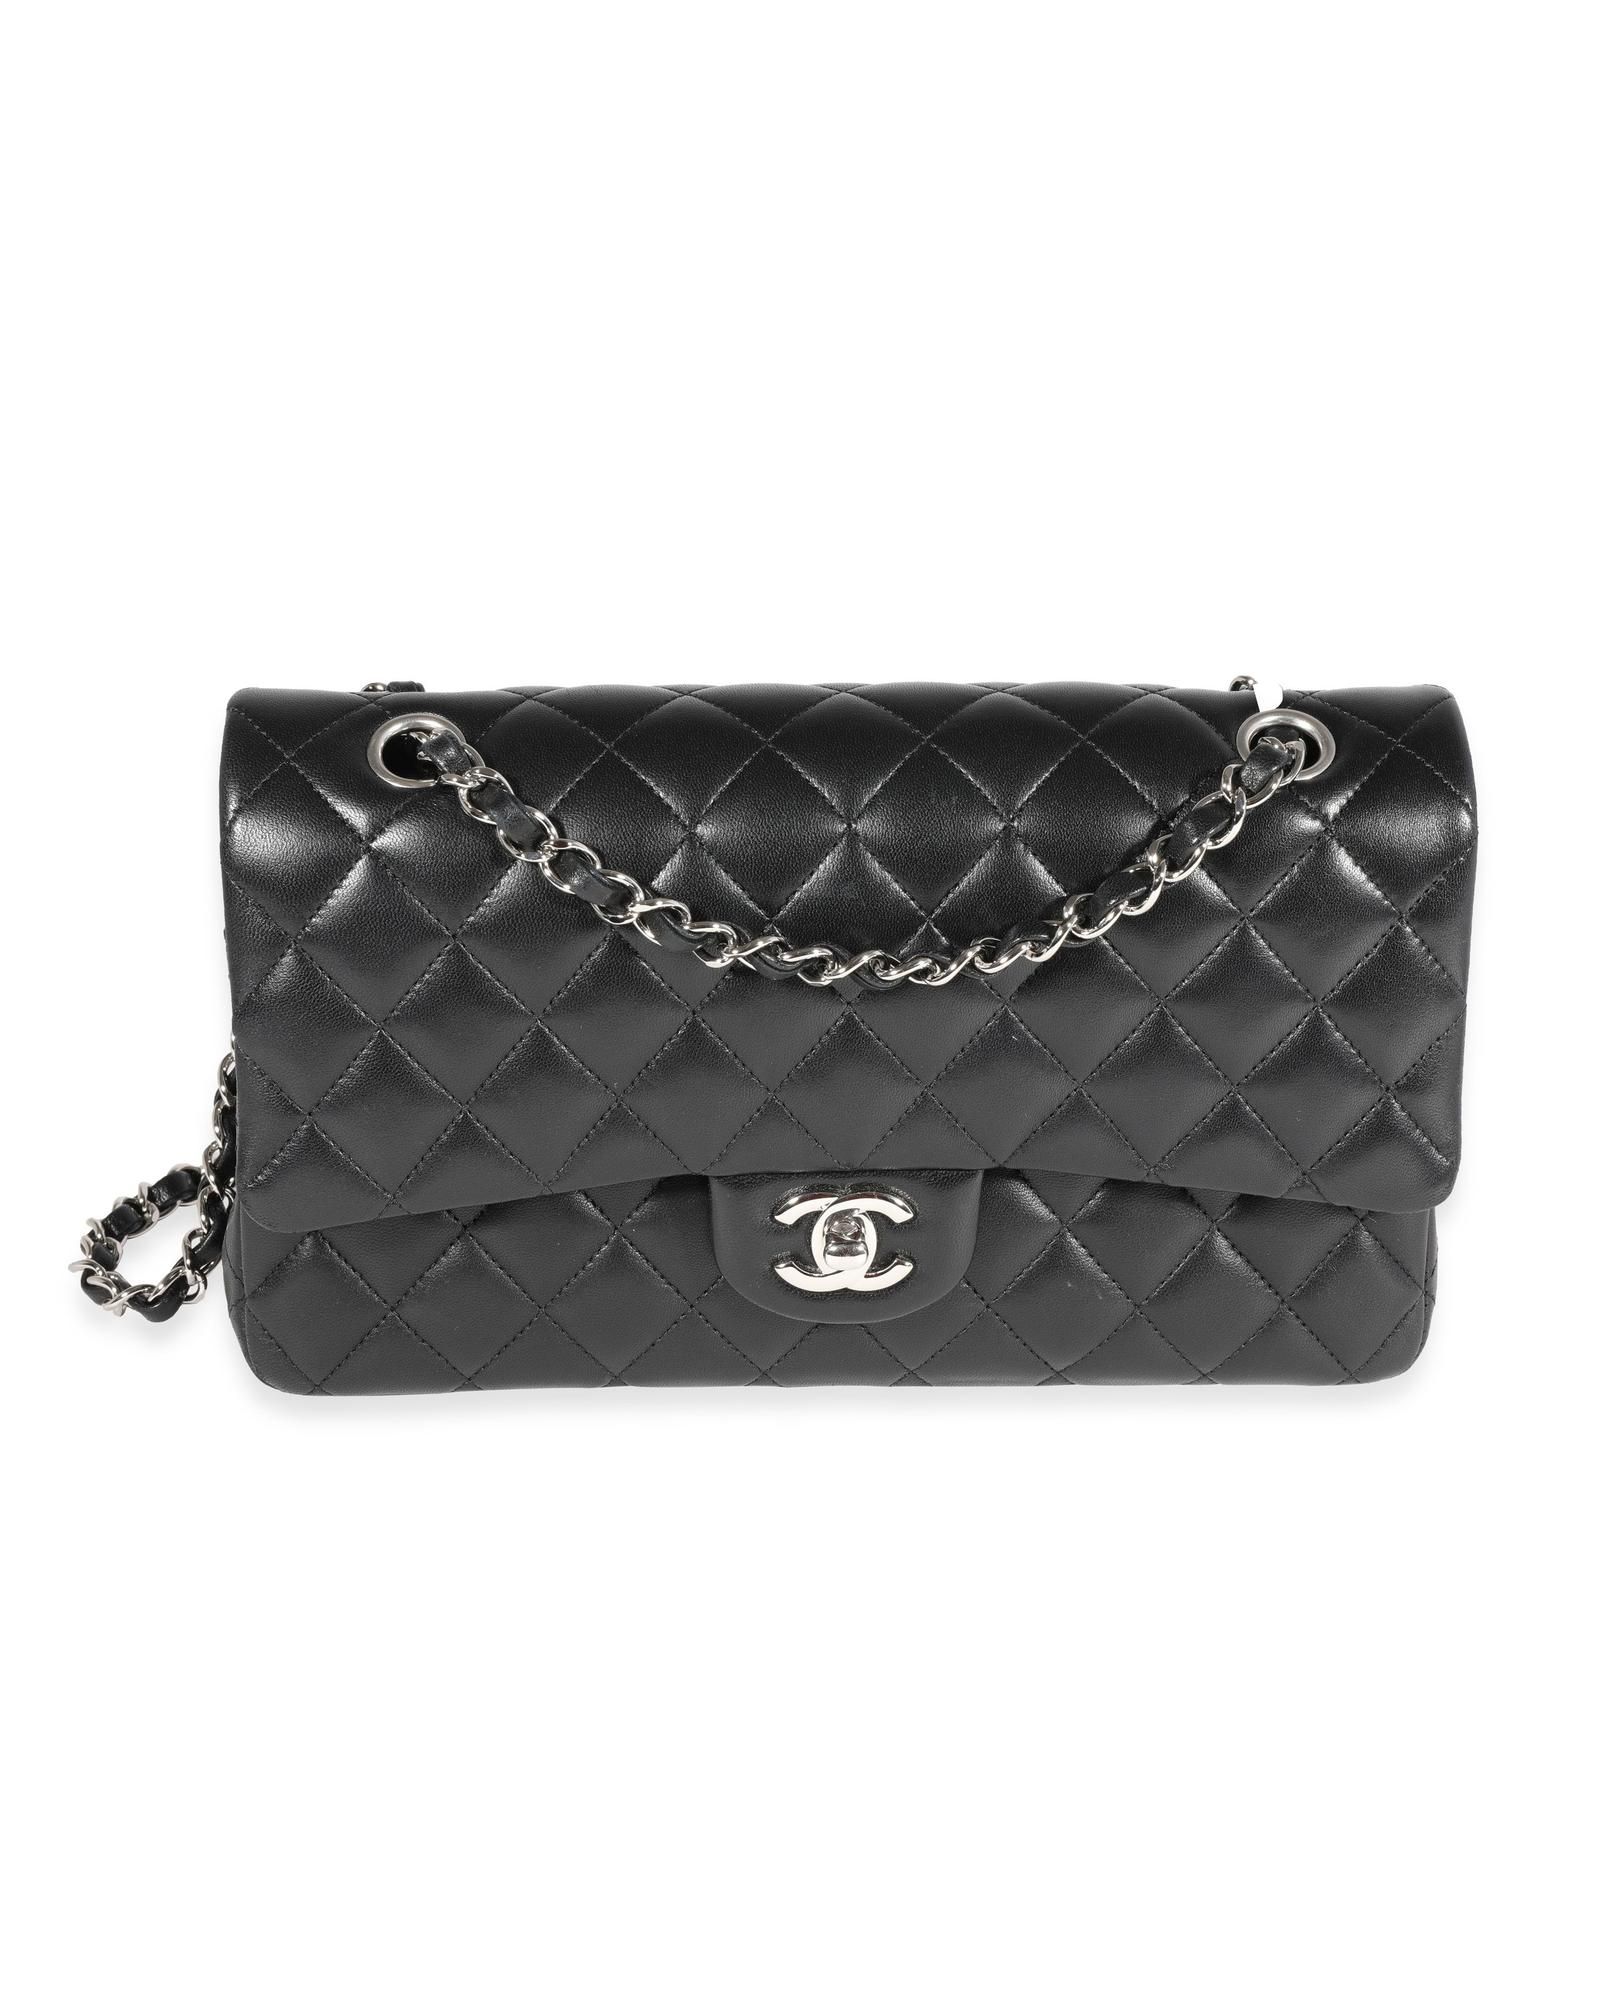 Chanel Chanel Black Quilted Lambskin Medium Classic Double Flap